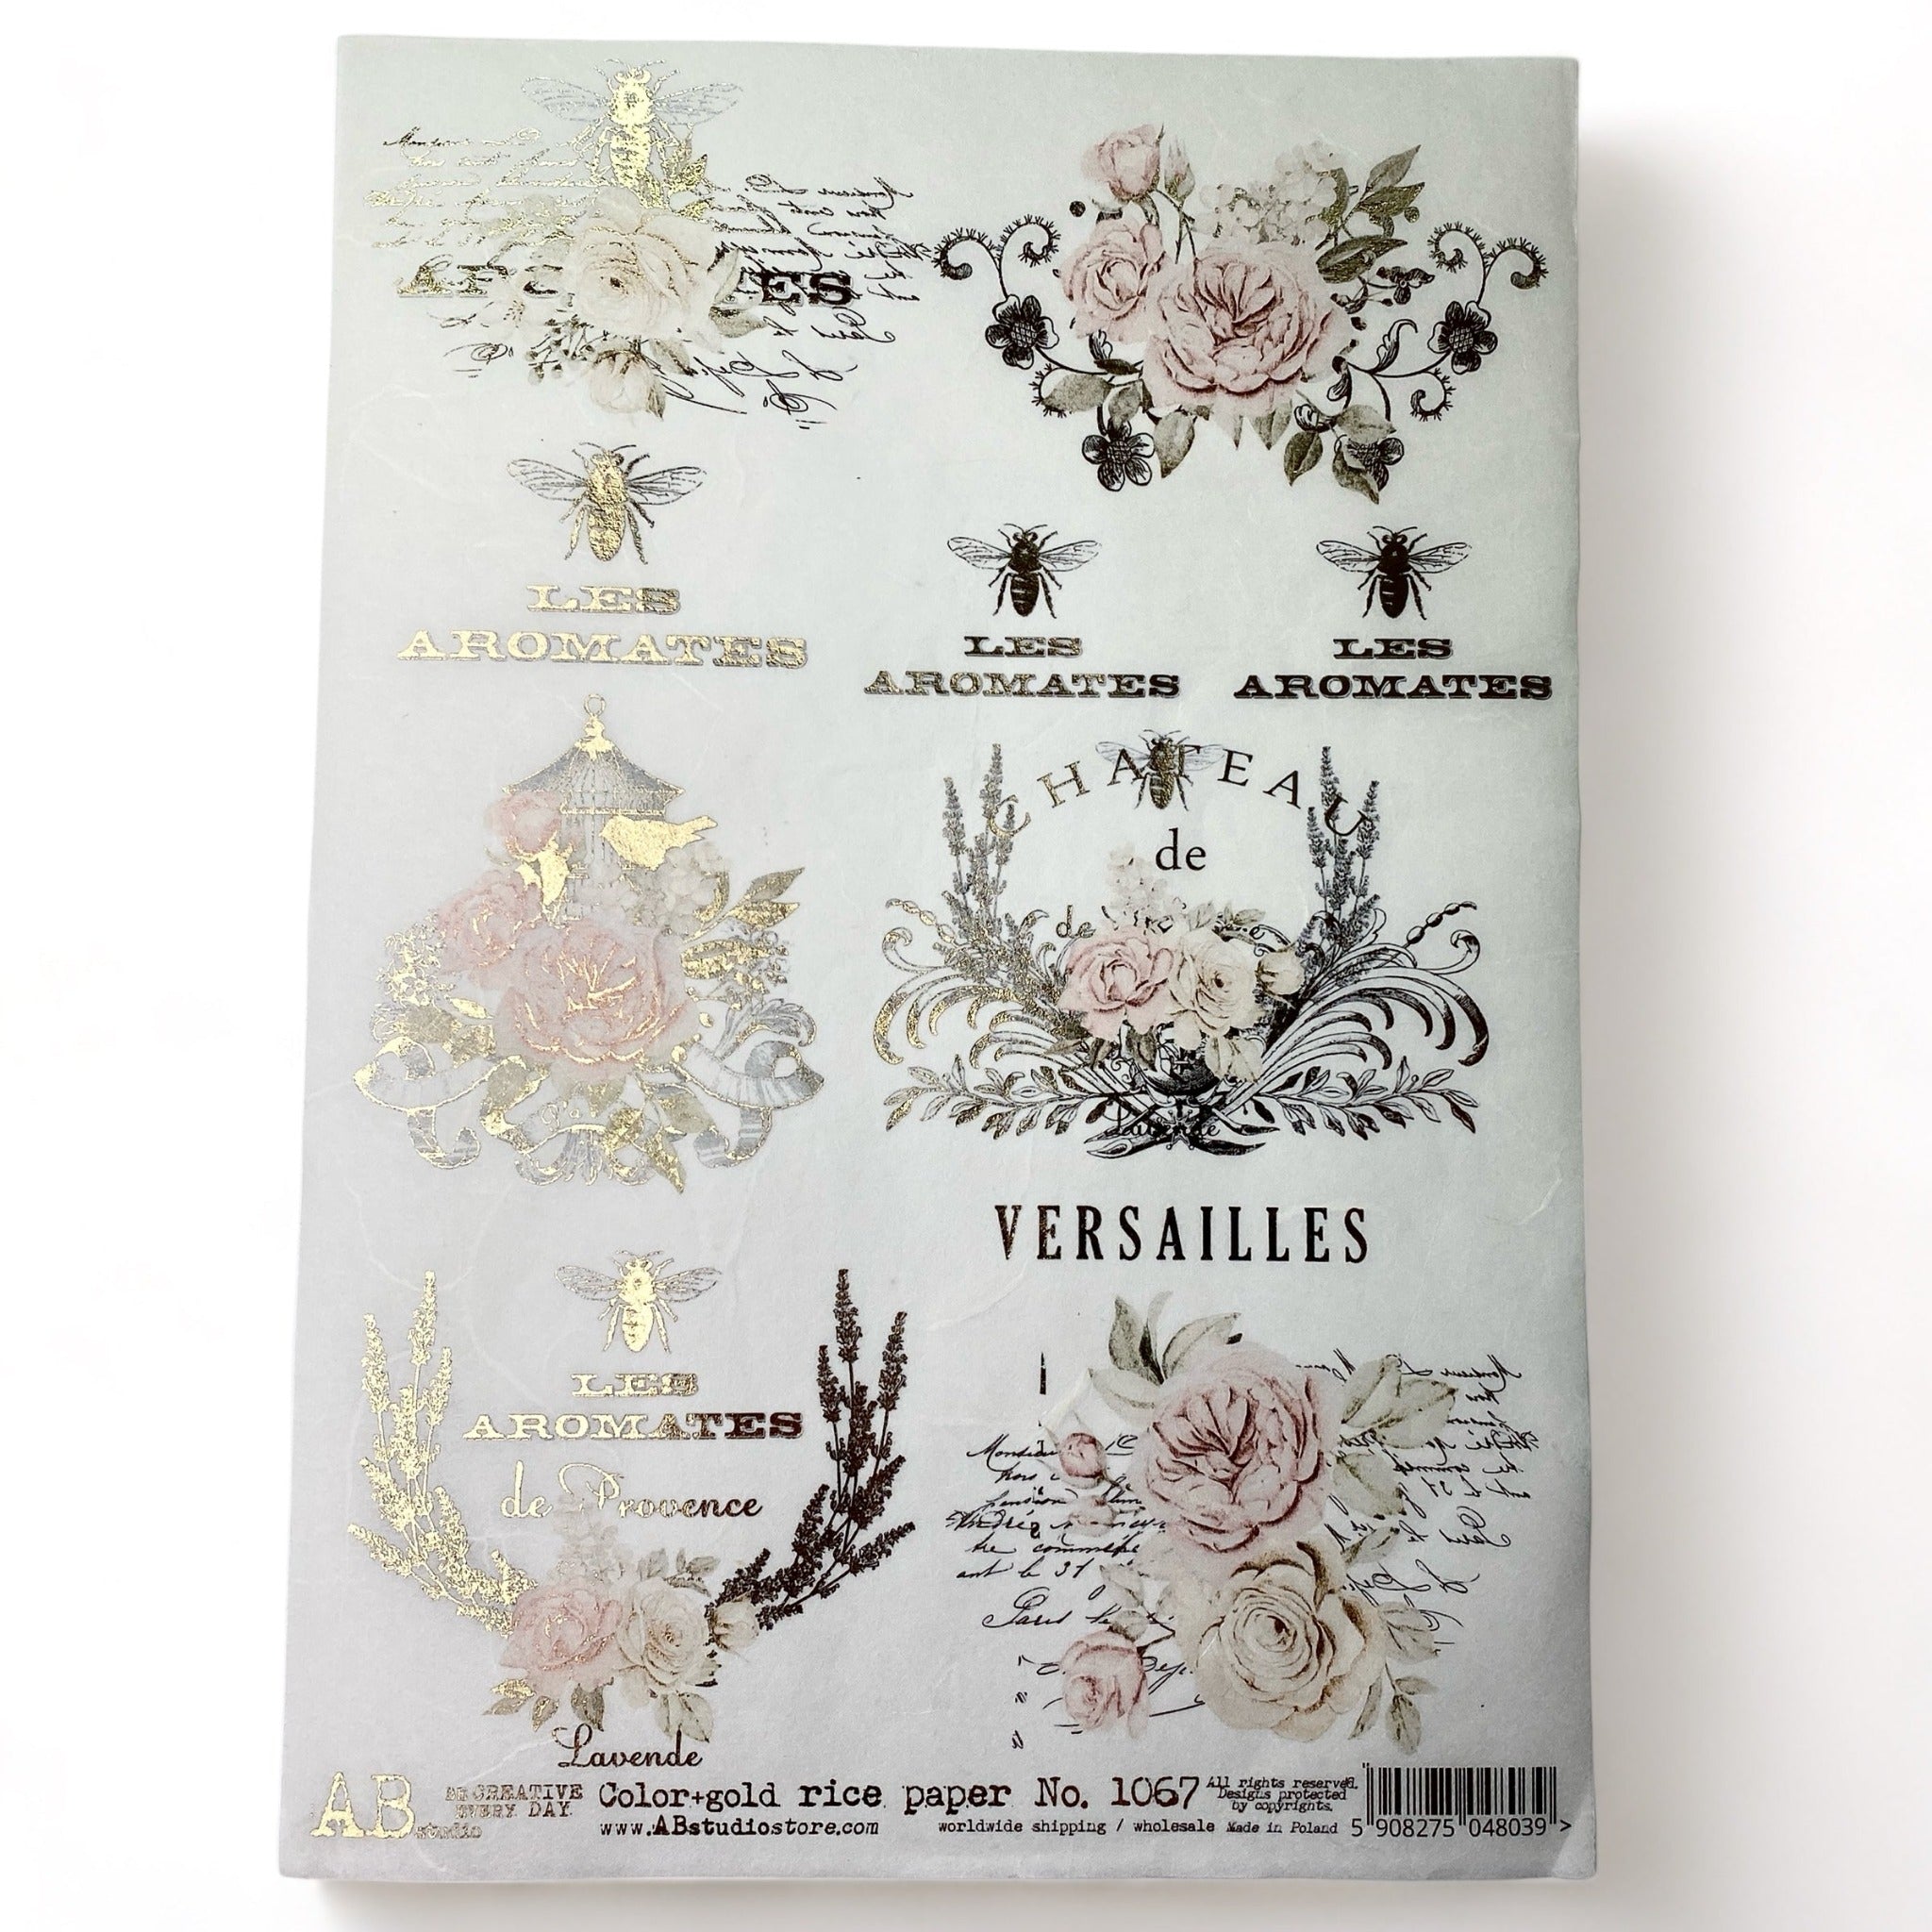 An A4 rice decoupage paper featuring floral designs, birdcages, and French writing highlighted with foil gilding is against a white background.